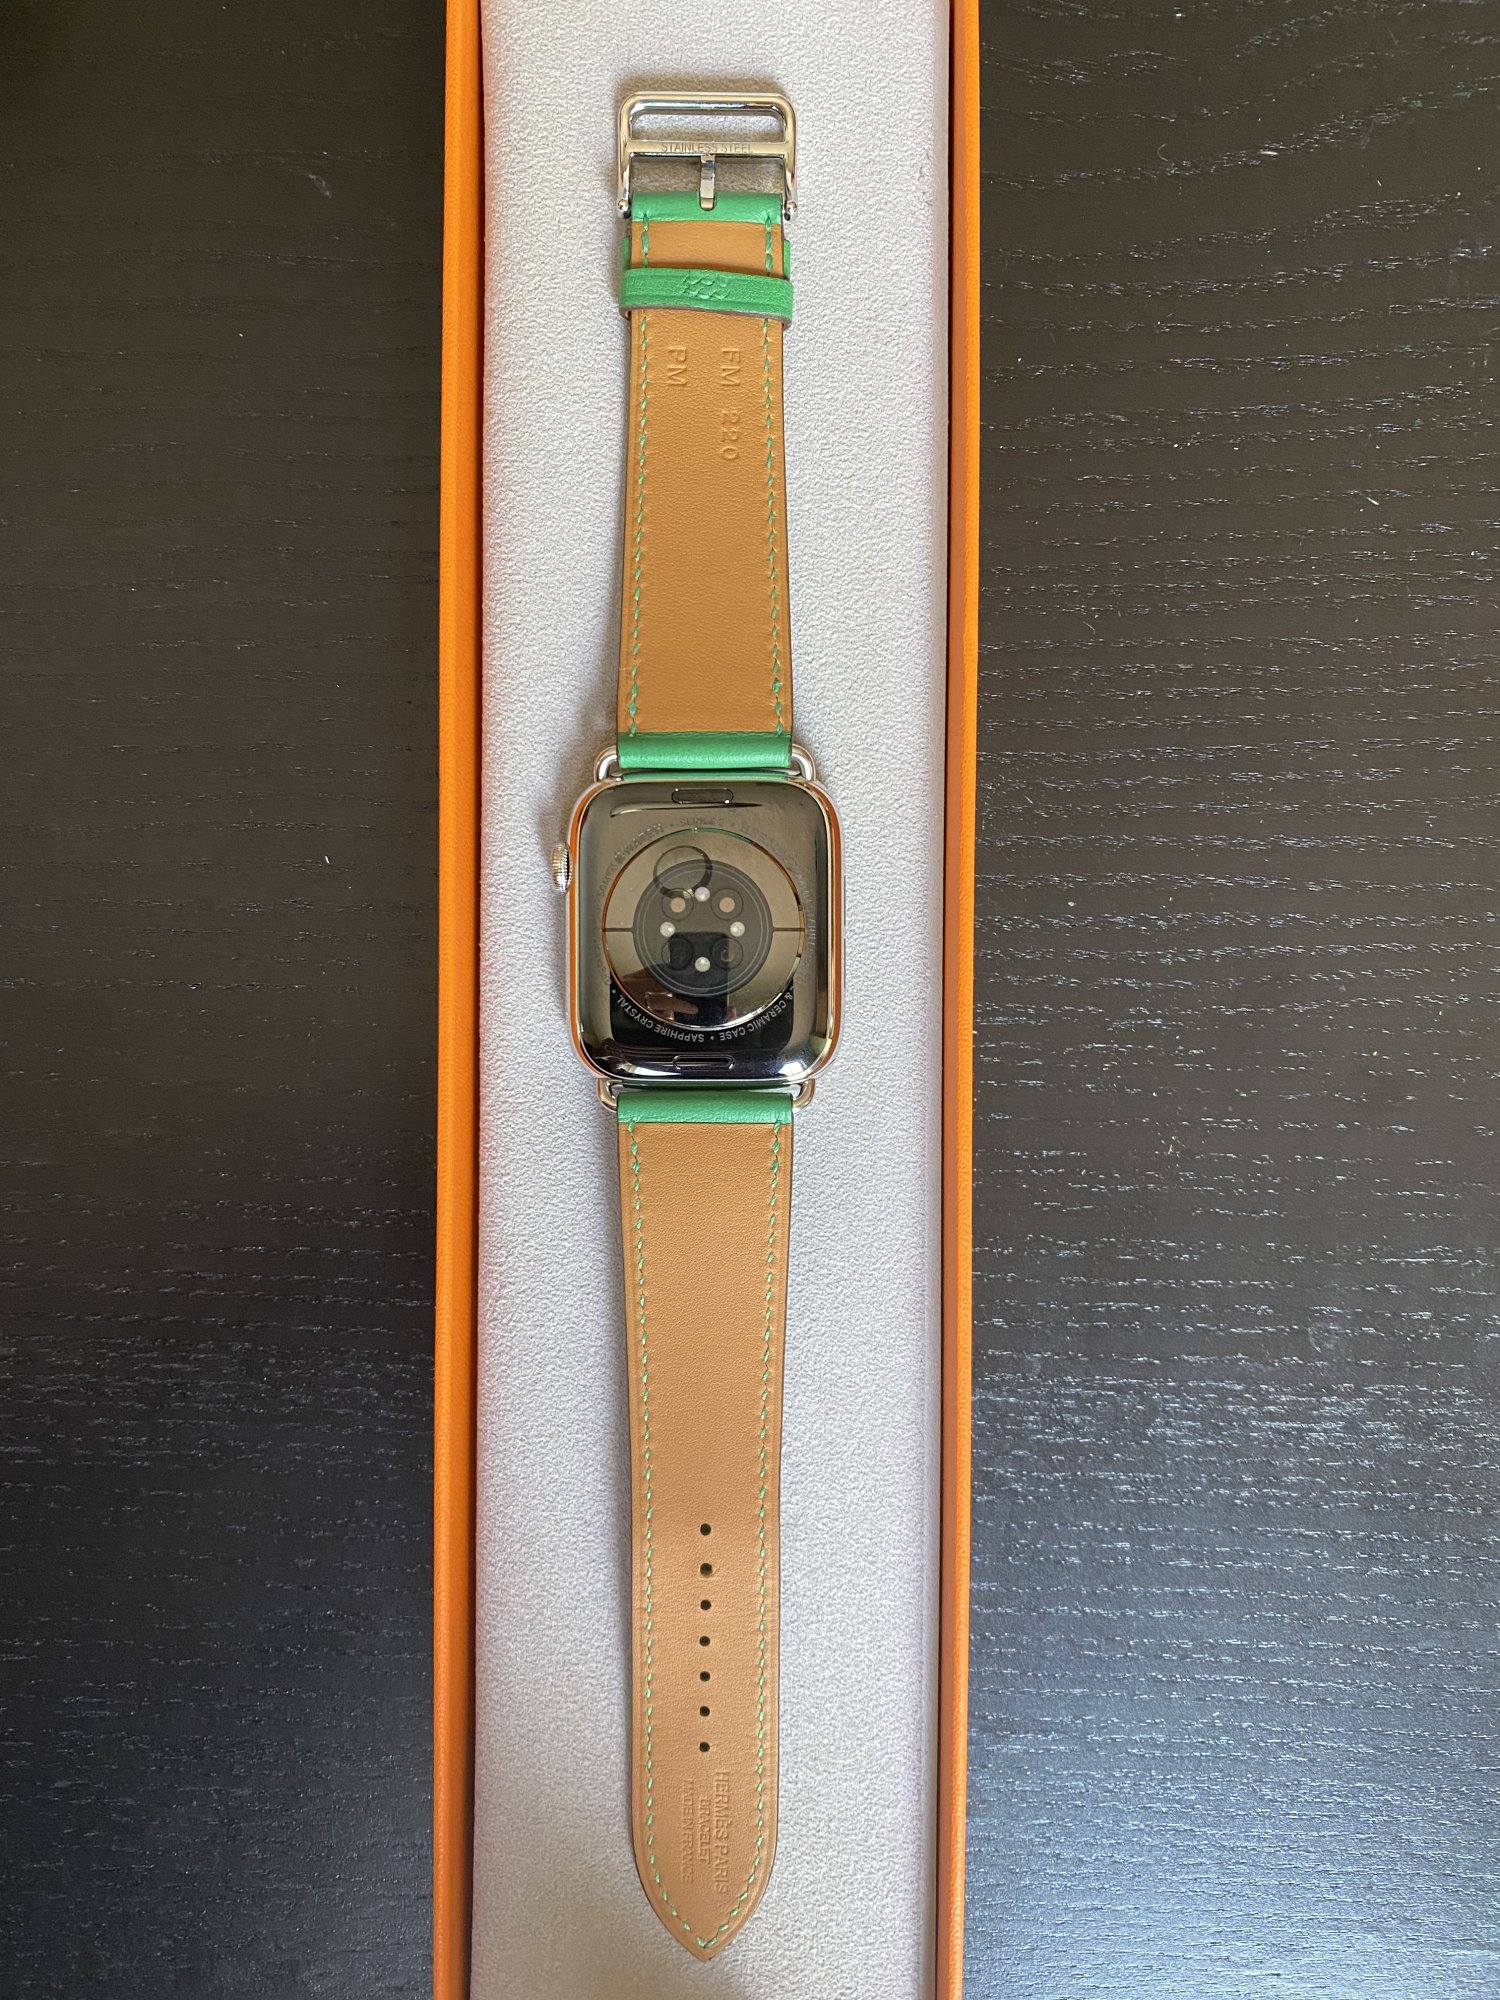 Buy French Barenia Leather Apple Watch Band in Fauve Color